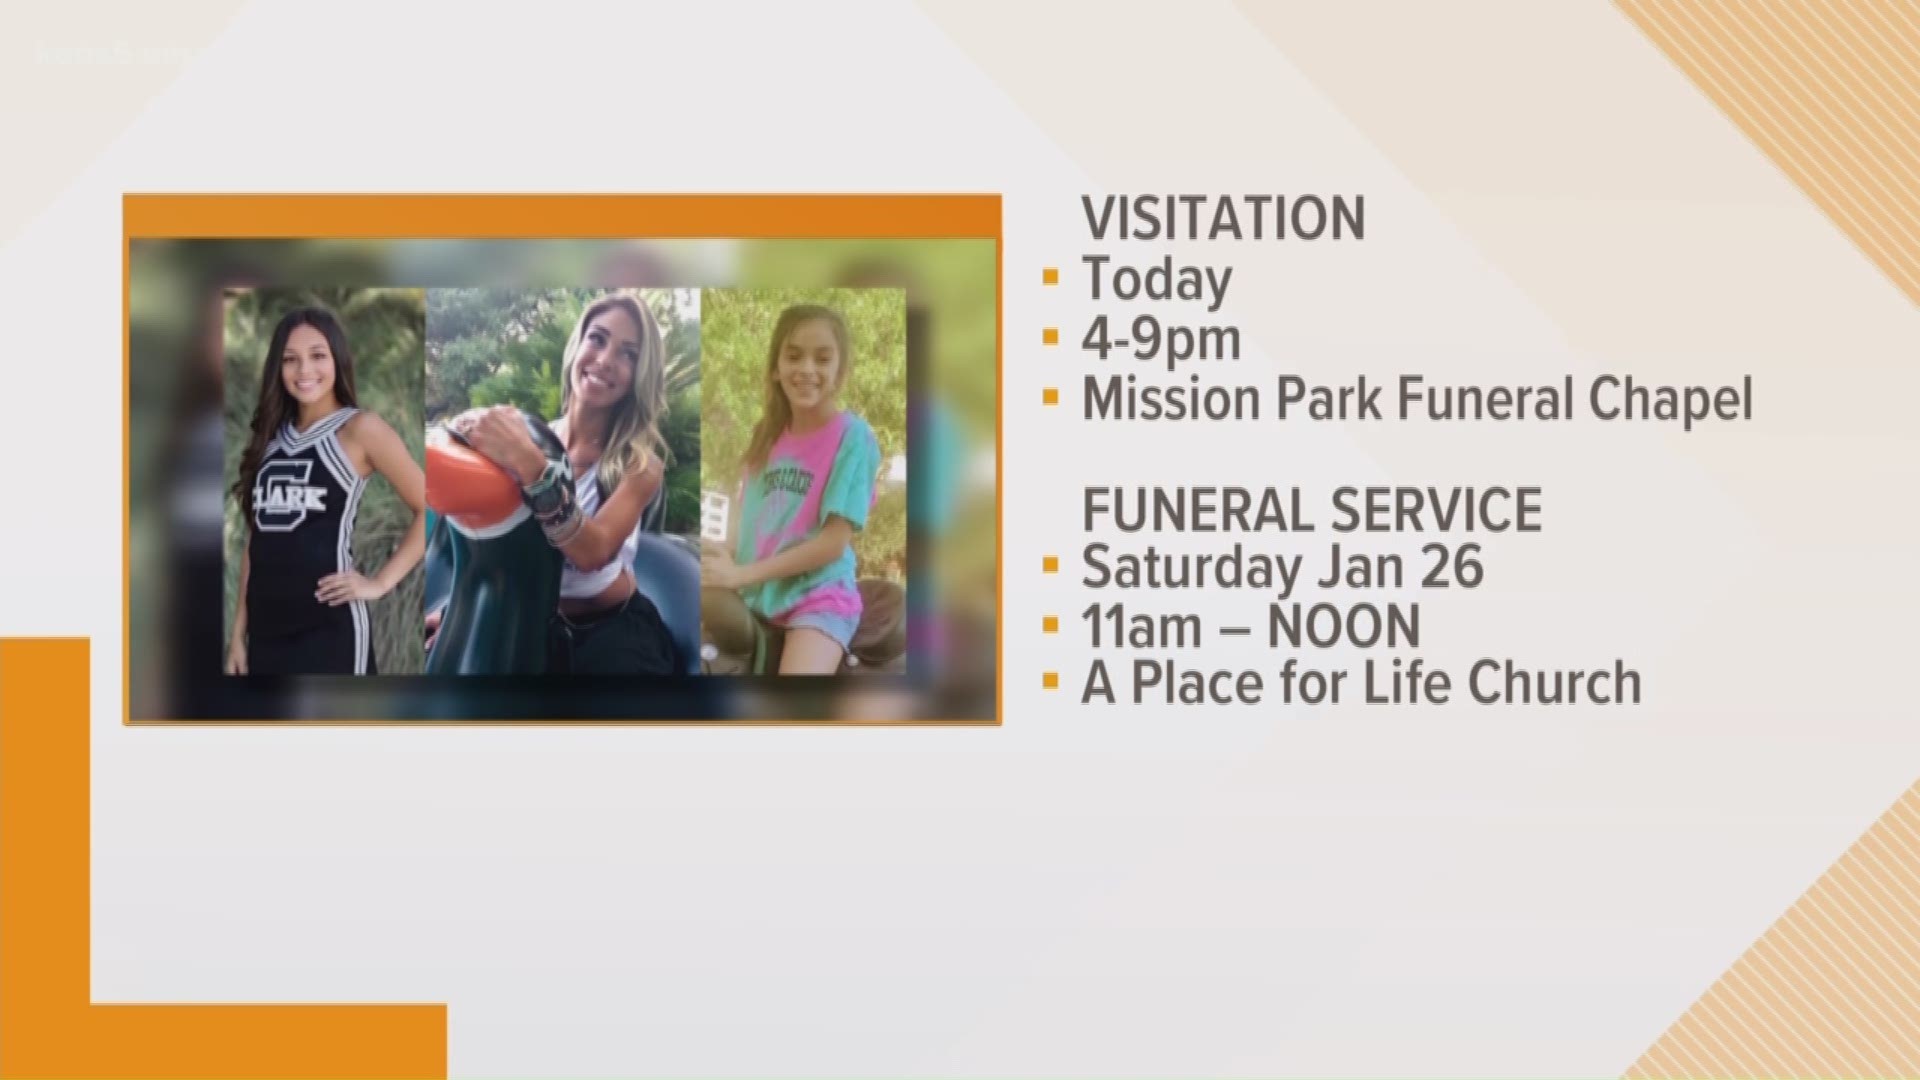 The visitation for Nichol Olsen and her daughters, 16-year-old Alexa and 10-year-old London, is at Mission Park Funeral Chapel in Stone Oak from 4:00 until 9:00 p.m. Friday. Their funeral is Saturday at A Place for Life Church on Loop 410 at 11:00 a.m.